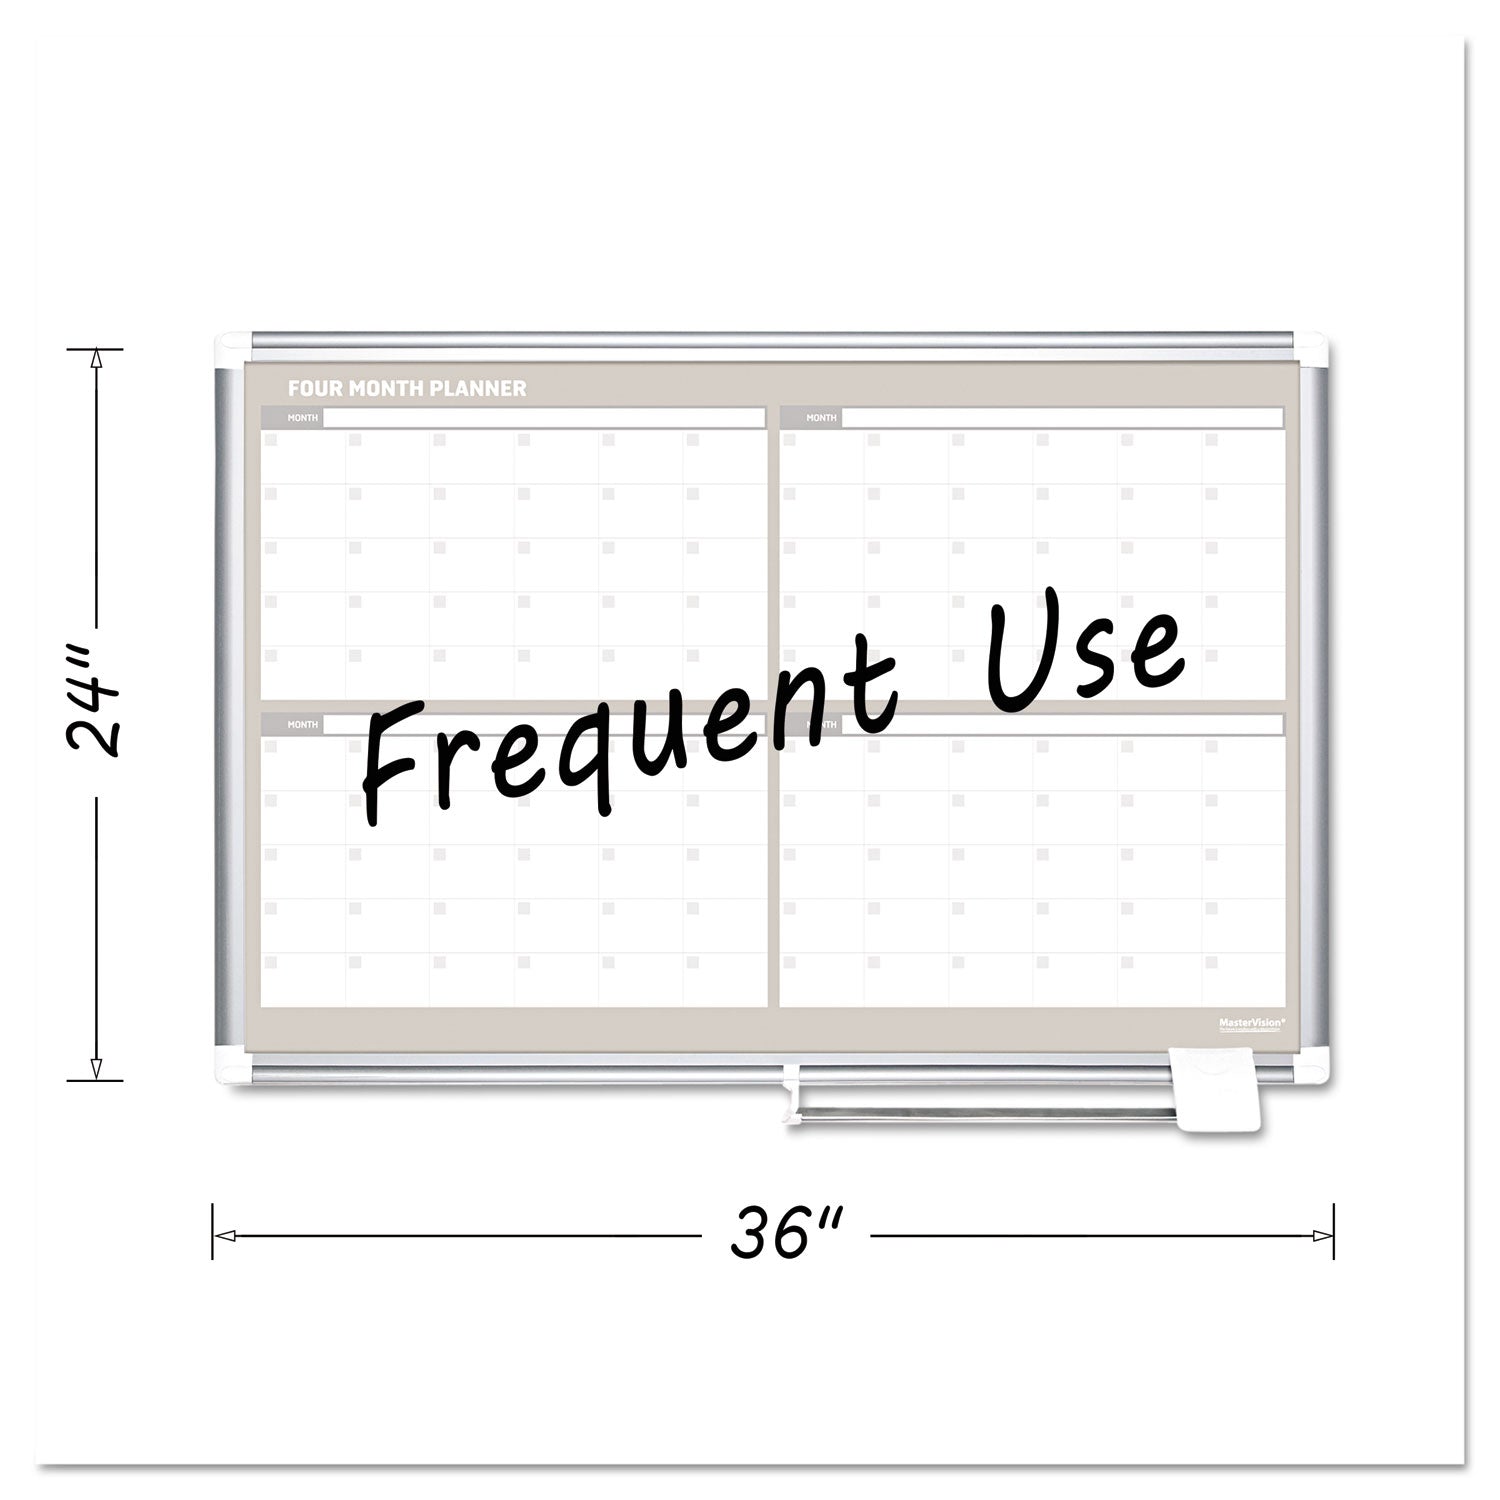 Magnetic Dry Erase Calendar Board, Four Month, 36 x 24, White Surface, Silver Aluminum Frame - 